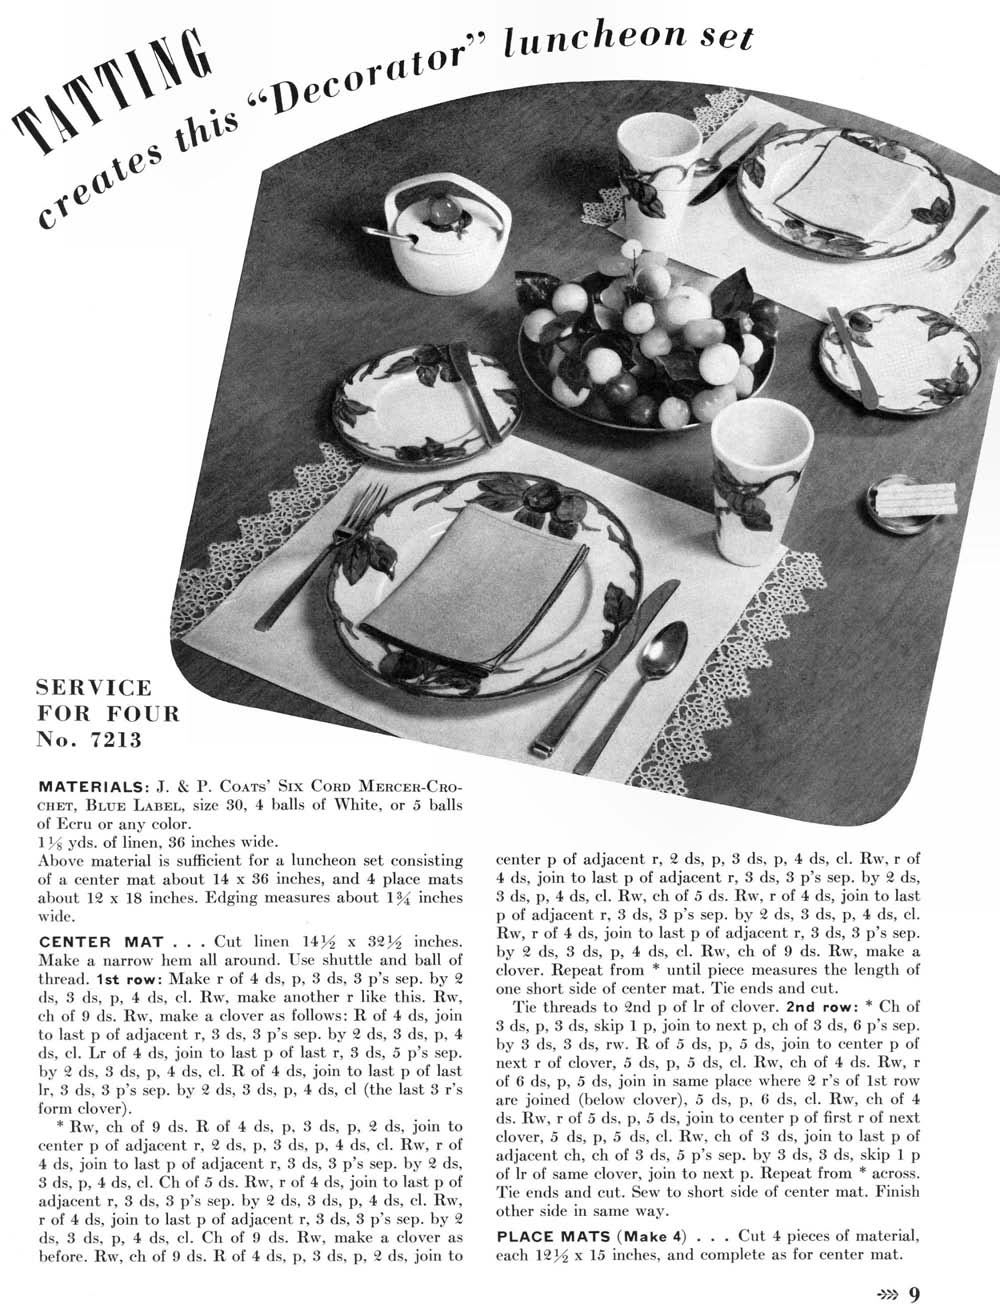 Service for Four Luncheon Set